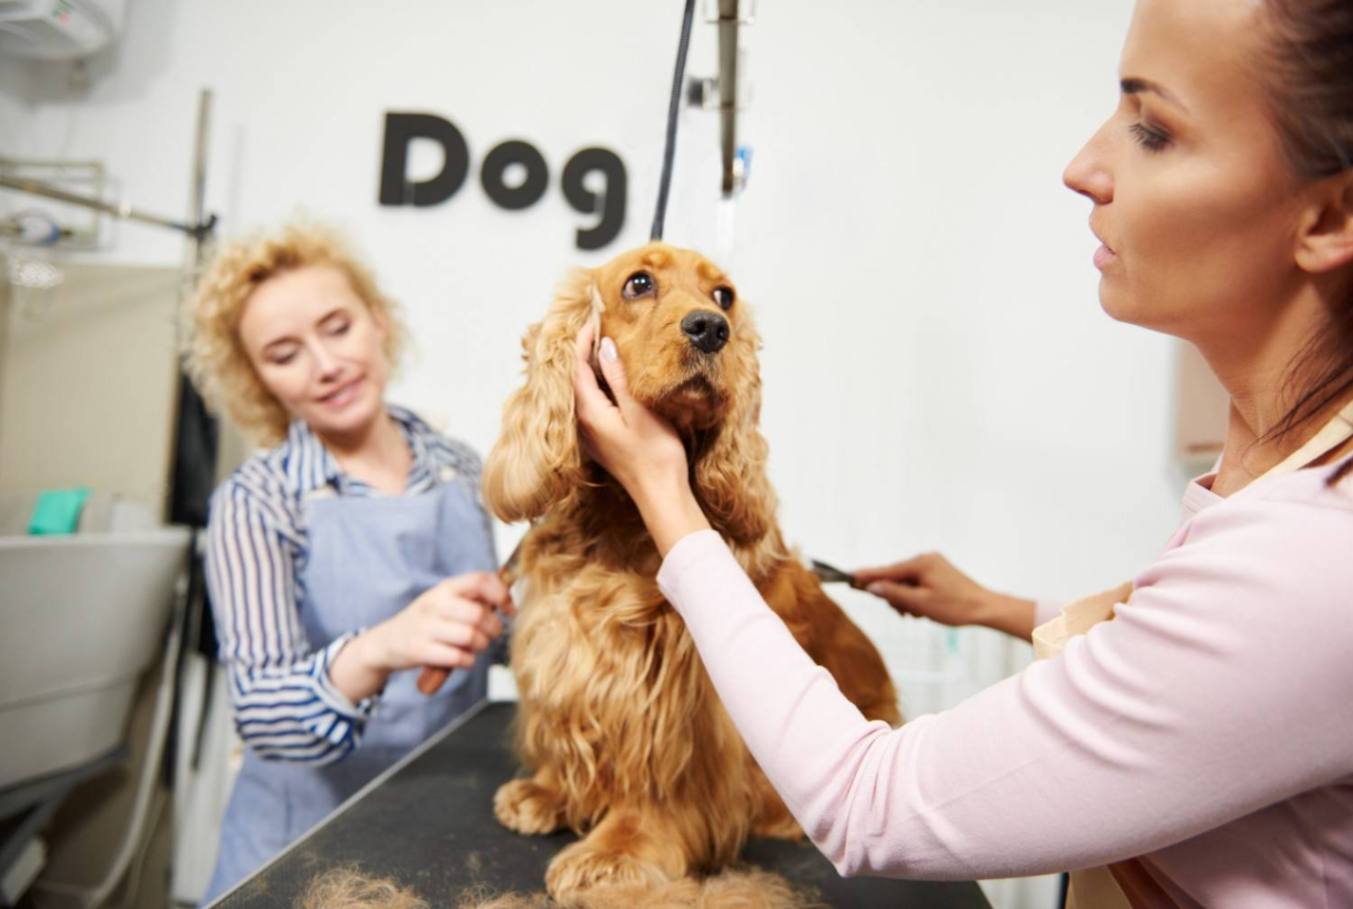 6 Ways Pet Groomers Can Communicate With Pet Parents